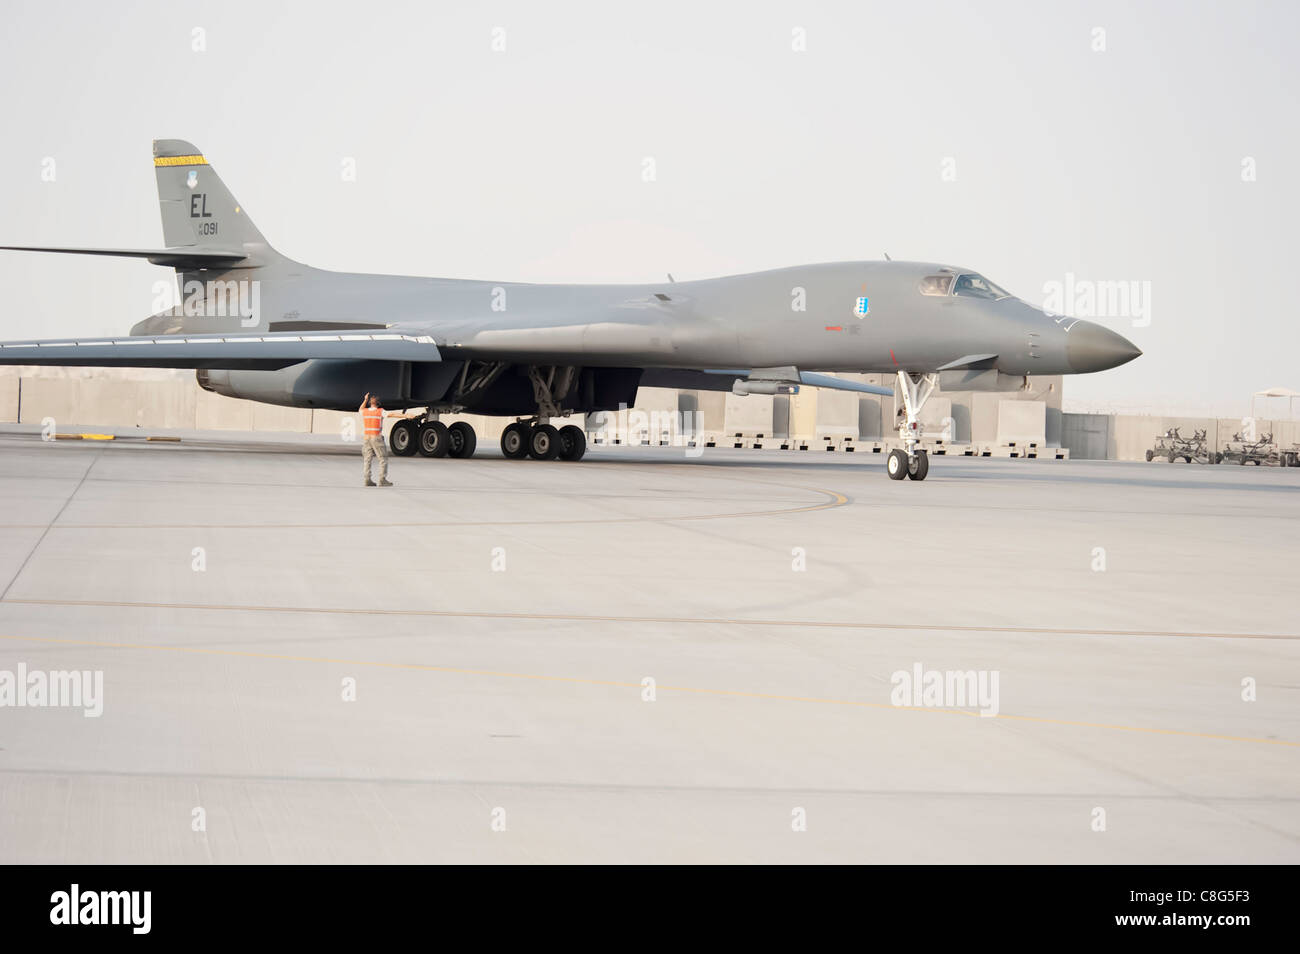 Staff Sgt. Daniel Gordon marshals a B1-B Lancer as it taxis at an air base in Southwest Asia before a combat mission Nov. 11, 2009. The multi-mission B-1 is the backbone of America's long-range bomber force. Sergeant Gordon is with the 37th Aircraft Maintenance Unit. Stock Photo